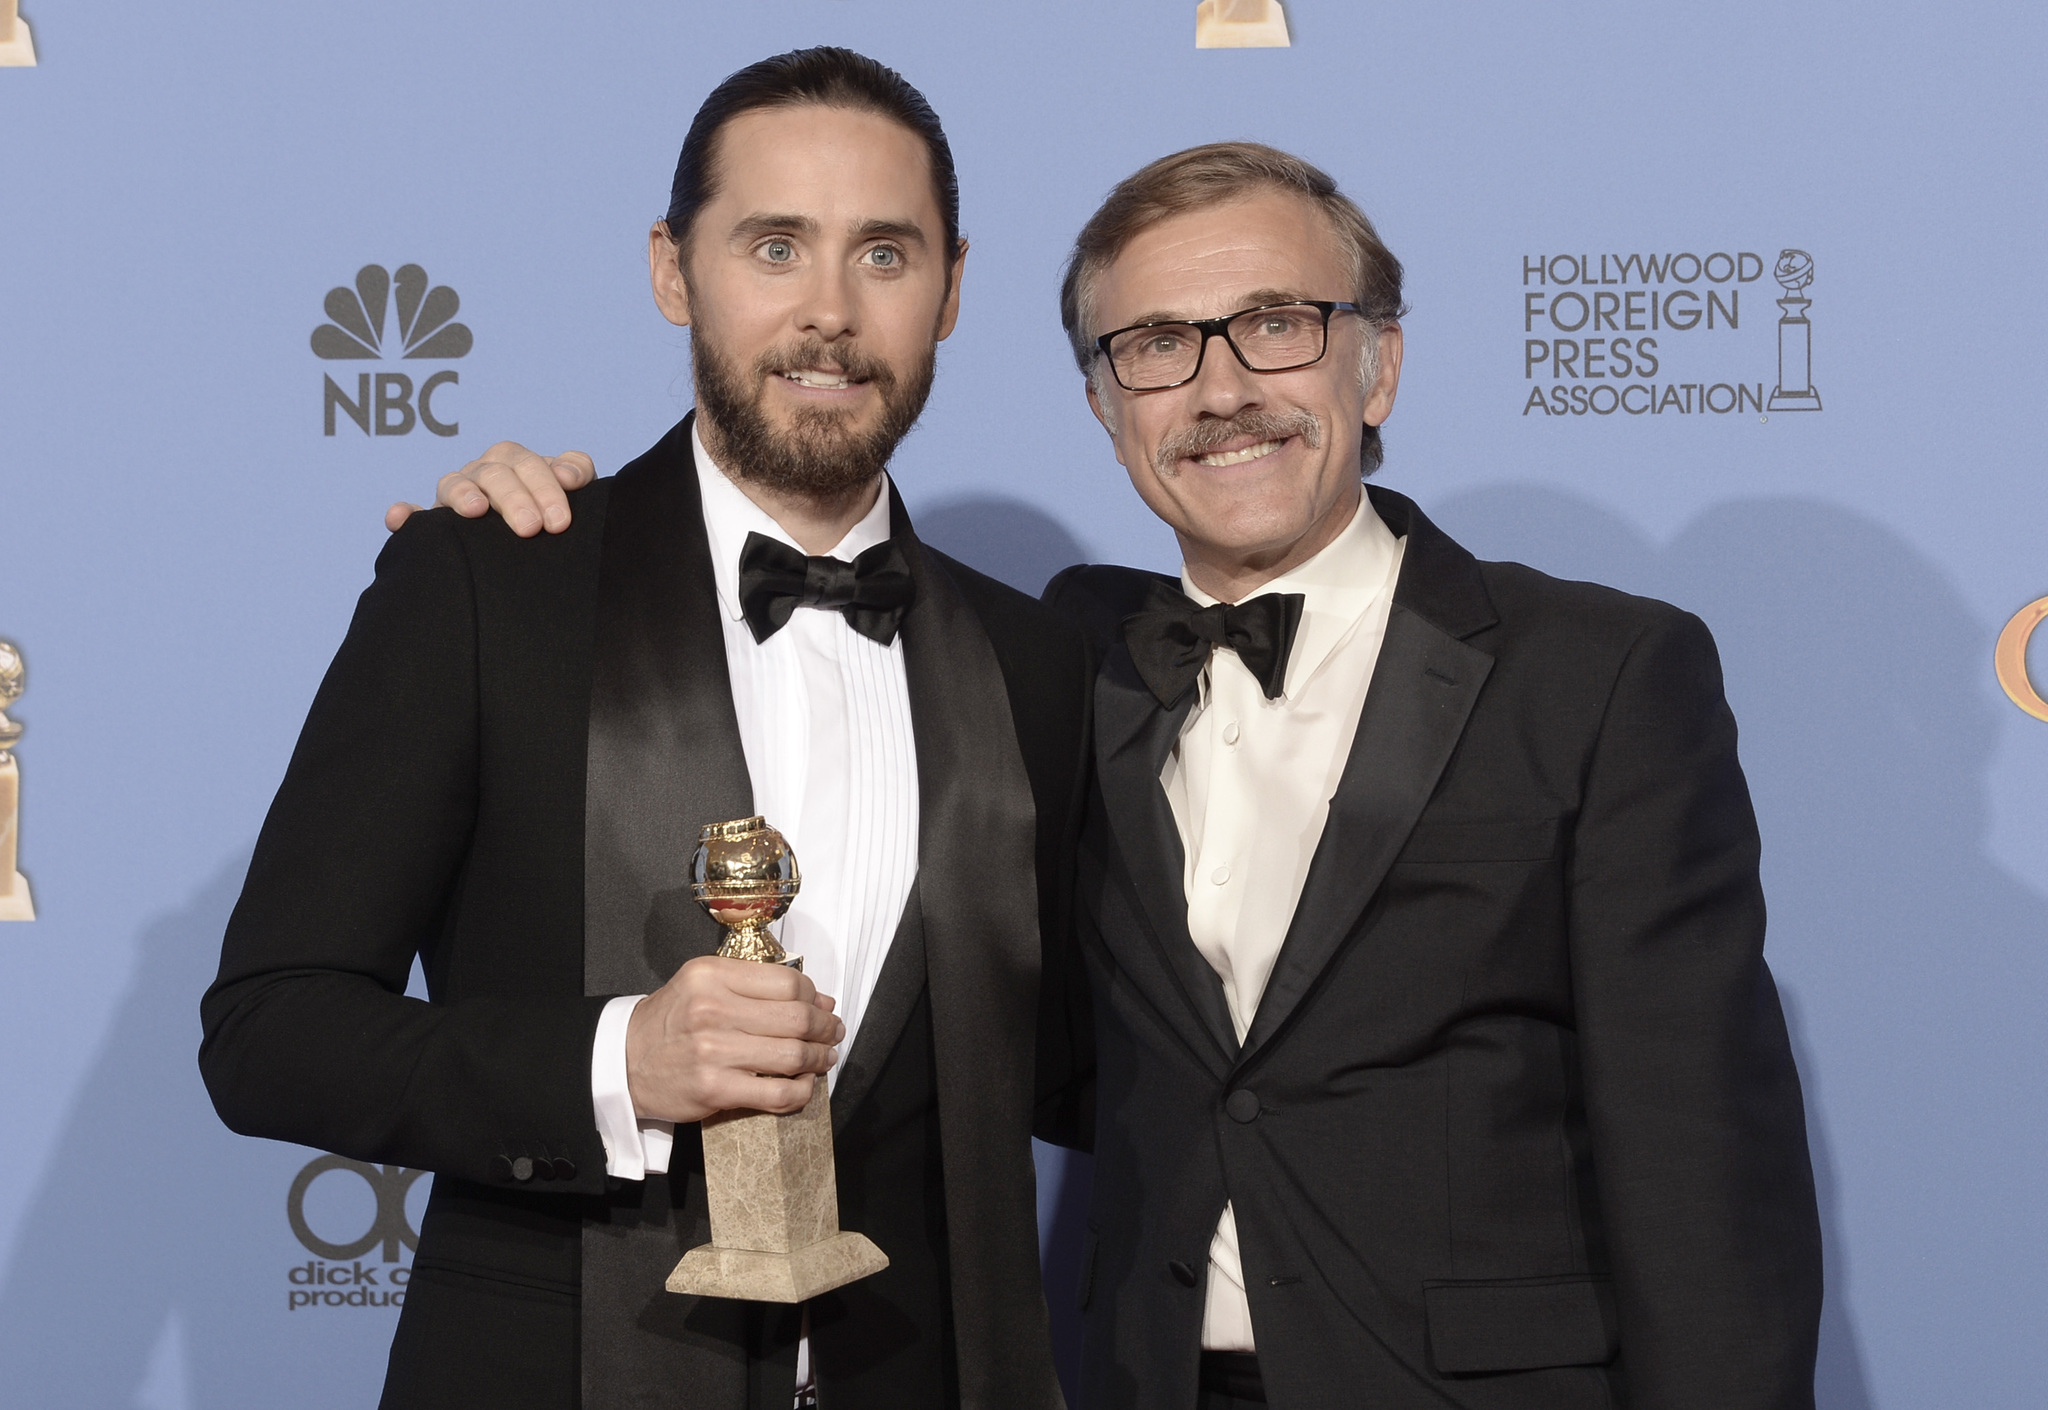 Jared Leto and Christoph Waltz